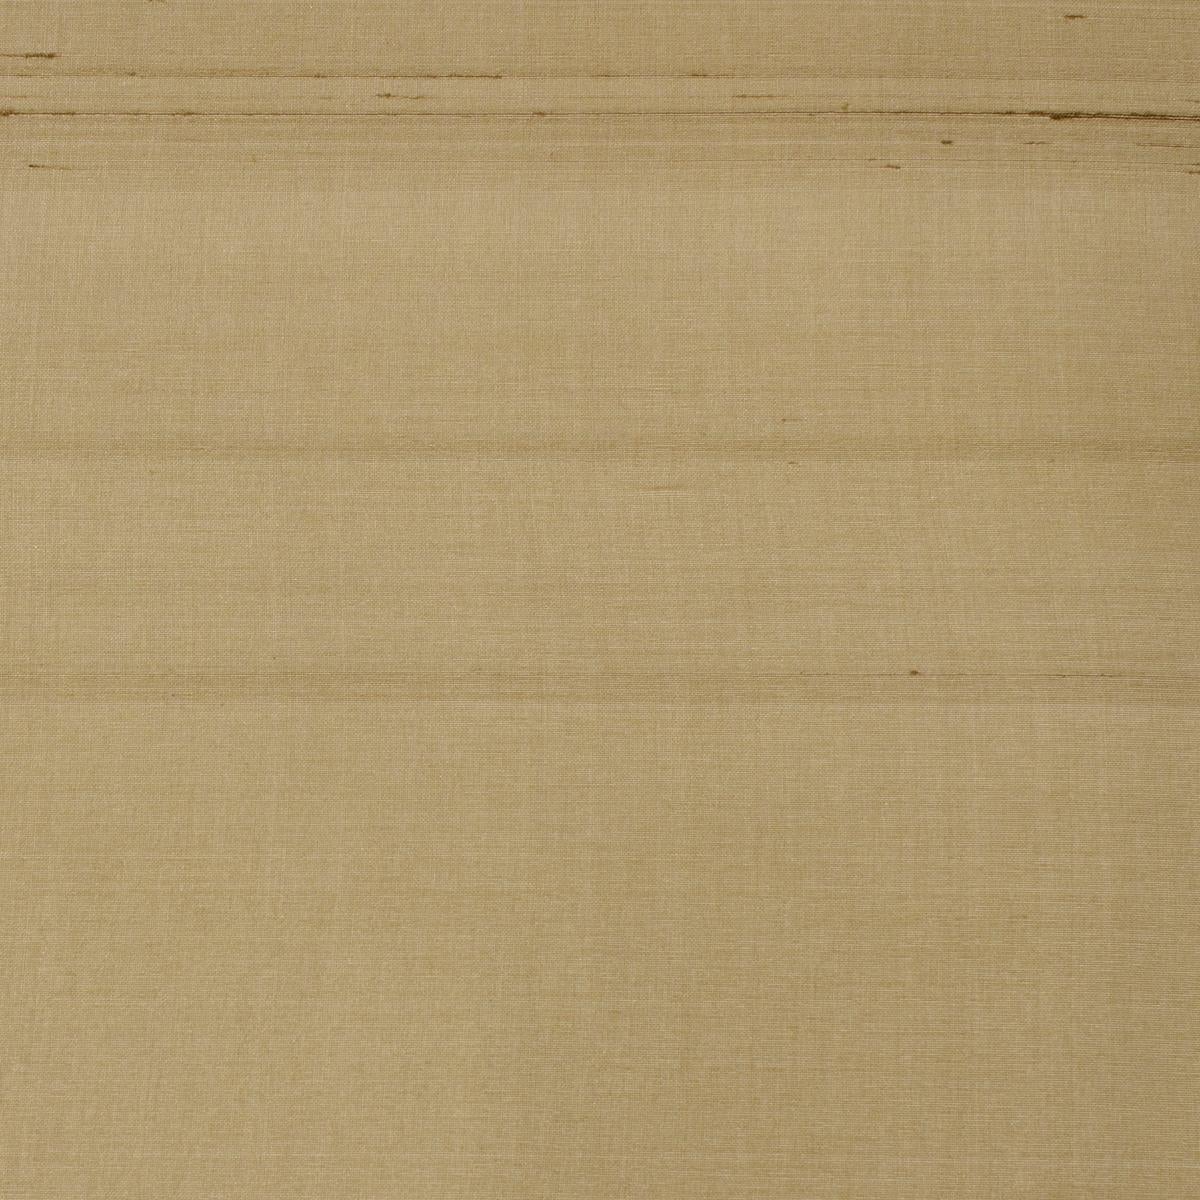 Japanese silk wall coverings by Paul Montgomery Studio are available in a wide variety of colors. Characterized by irregular thickness of weave and a rustle of knots, Japanese silk is an expression of elegance and charm. The 100 percent woven silk